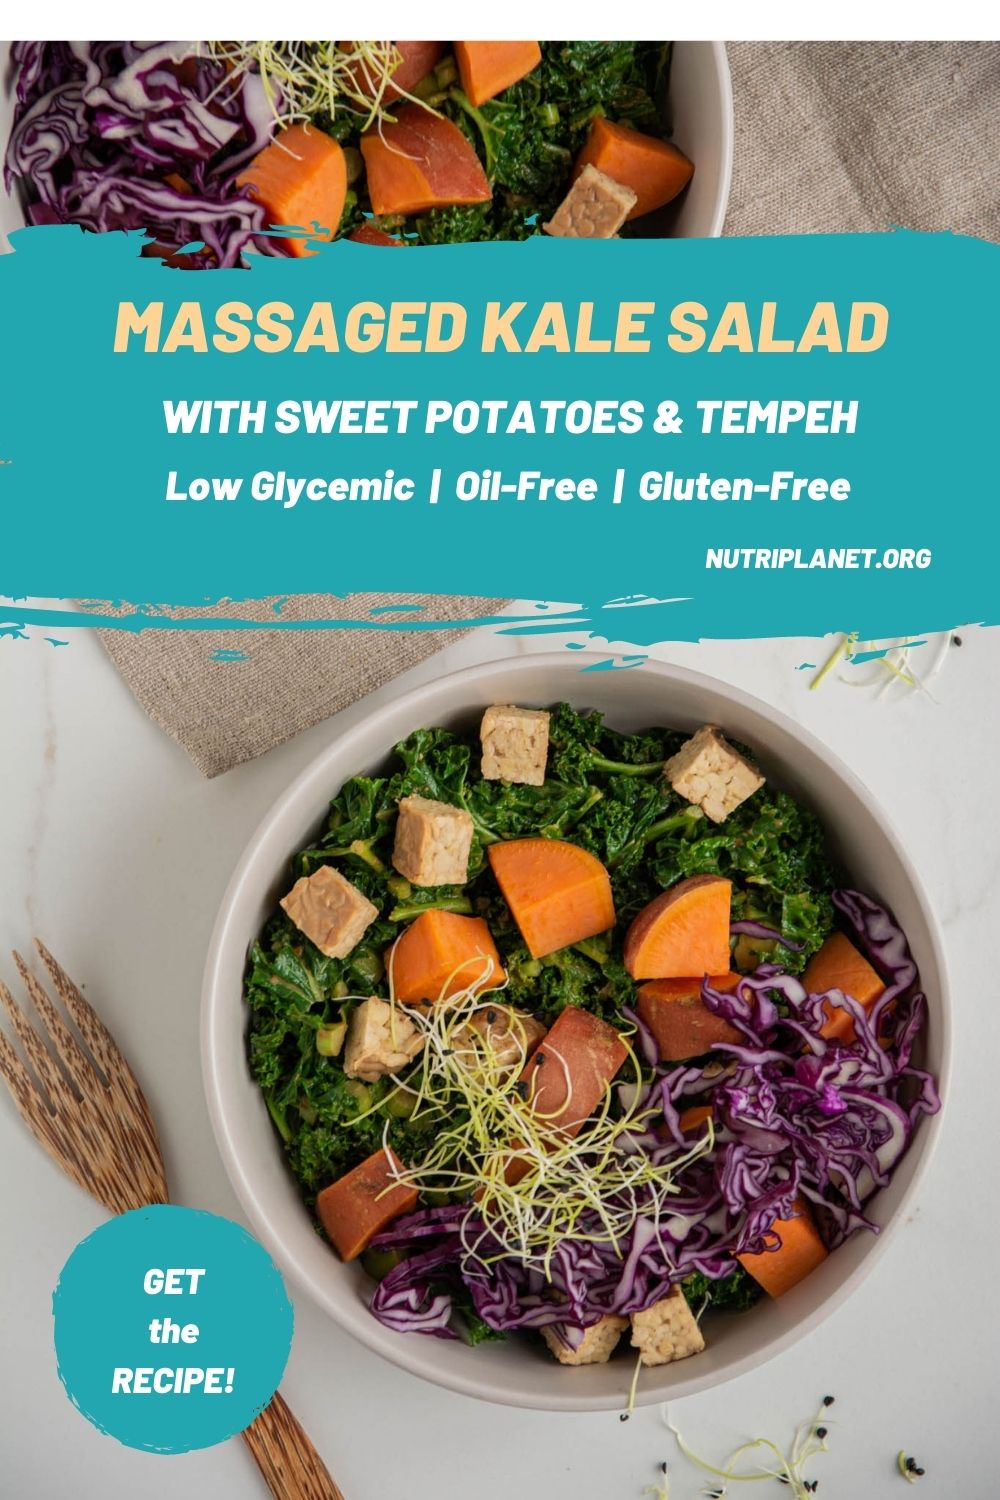 Any fan of kale will enjoy this healthy and delicious massaged kale salad that is ready in under 30 minutes. Steamed and massaged kale paired with sweet potatoes and tempeh makes a filling and nourishing plant-based meal. Using steamed kale for greater antioxidant capacity.